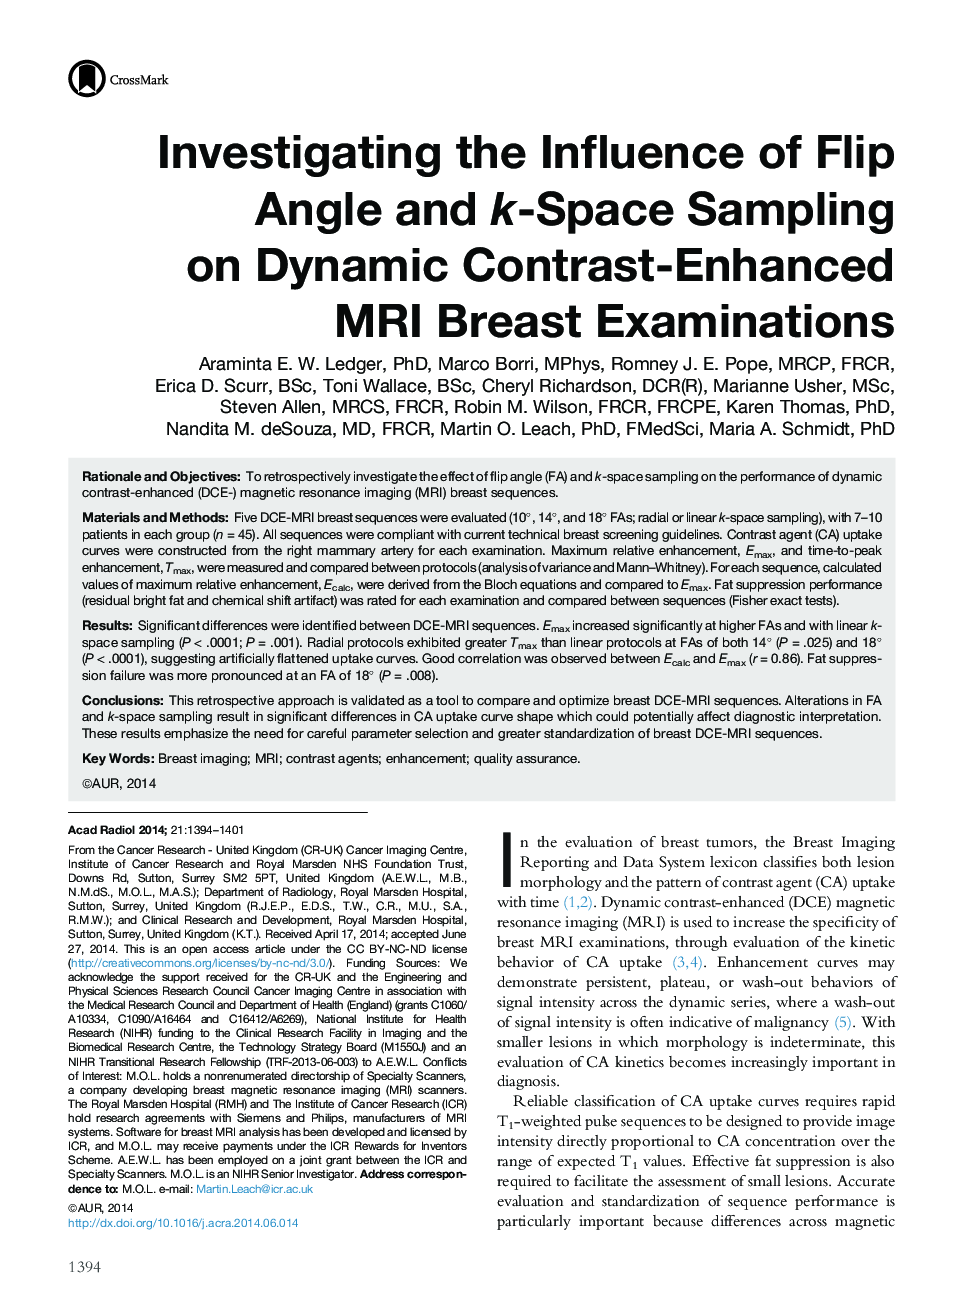 Investigating the Influence of Flip Angle and k-Space Sampling on Dynamic Contrast-Enhanced MRI Breast Examinations